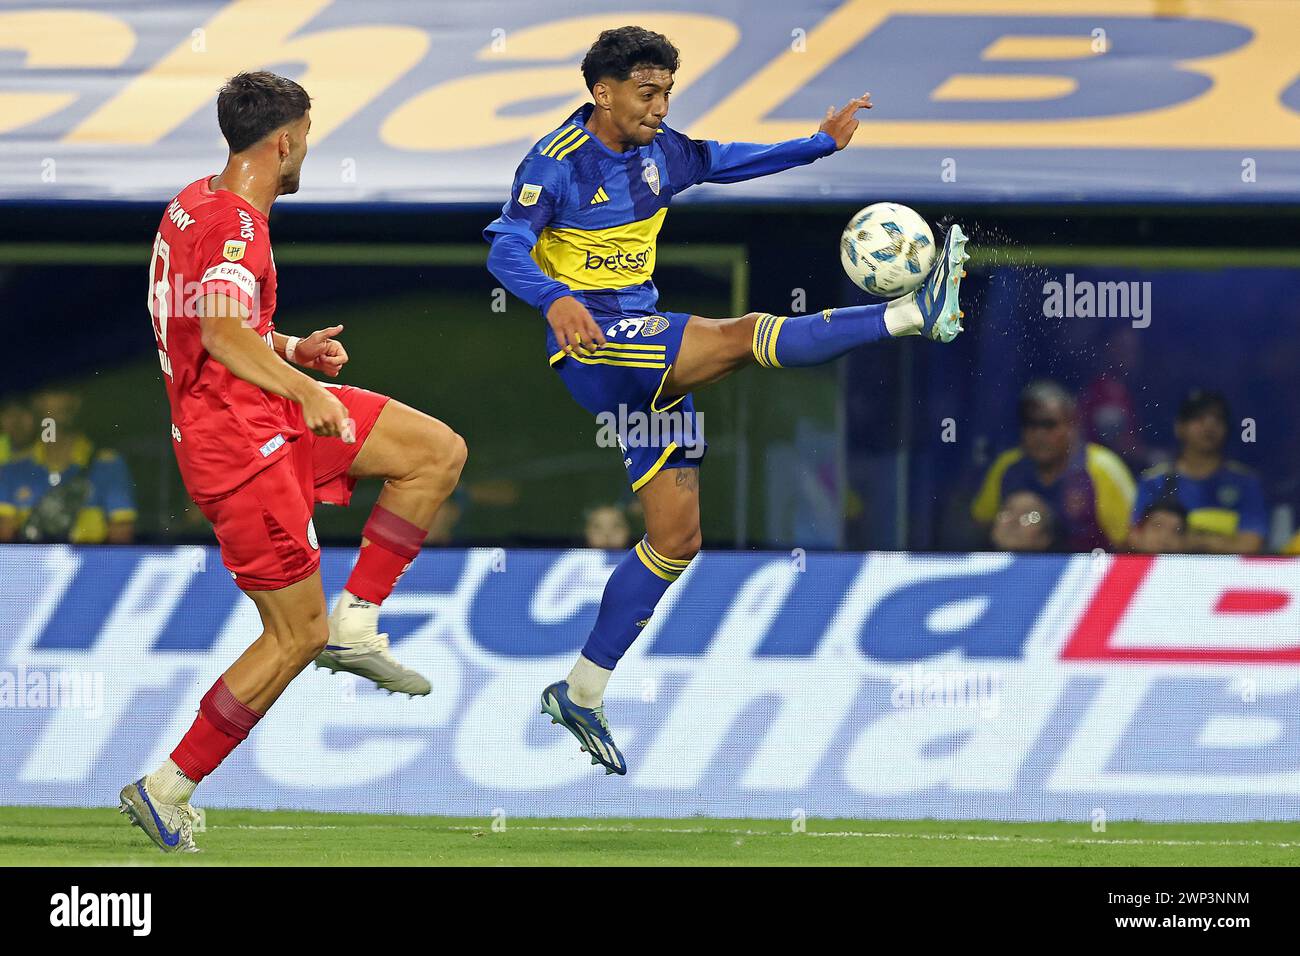 Boca Juniors’ midfielder Cristian Medina (R) controls the ball next Belgrano's defender Nicolas Meriano during the Argentine Professional Football League Cup 2024 match at La Bombonera stadium in Buenos Aires on March 3, 2024.  Boca Juniors won by 3-2 and Cavani scored a hat-trick.  (Photo by Alejandro Pagni / PHOTOxPHOTO) Stock Photo